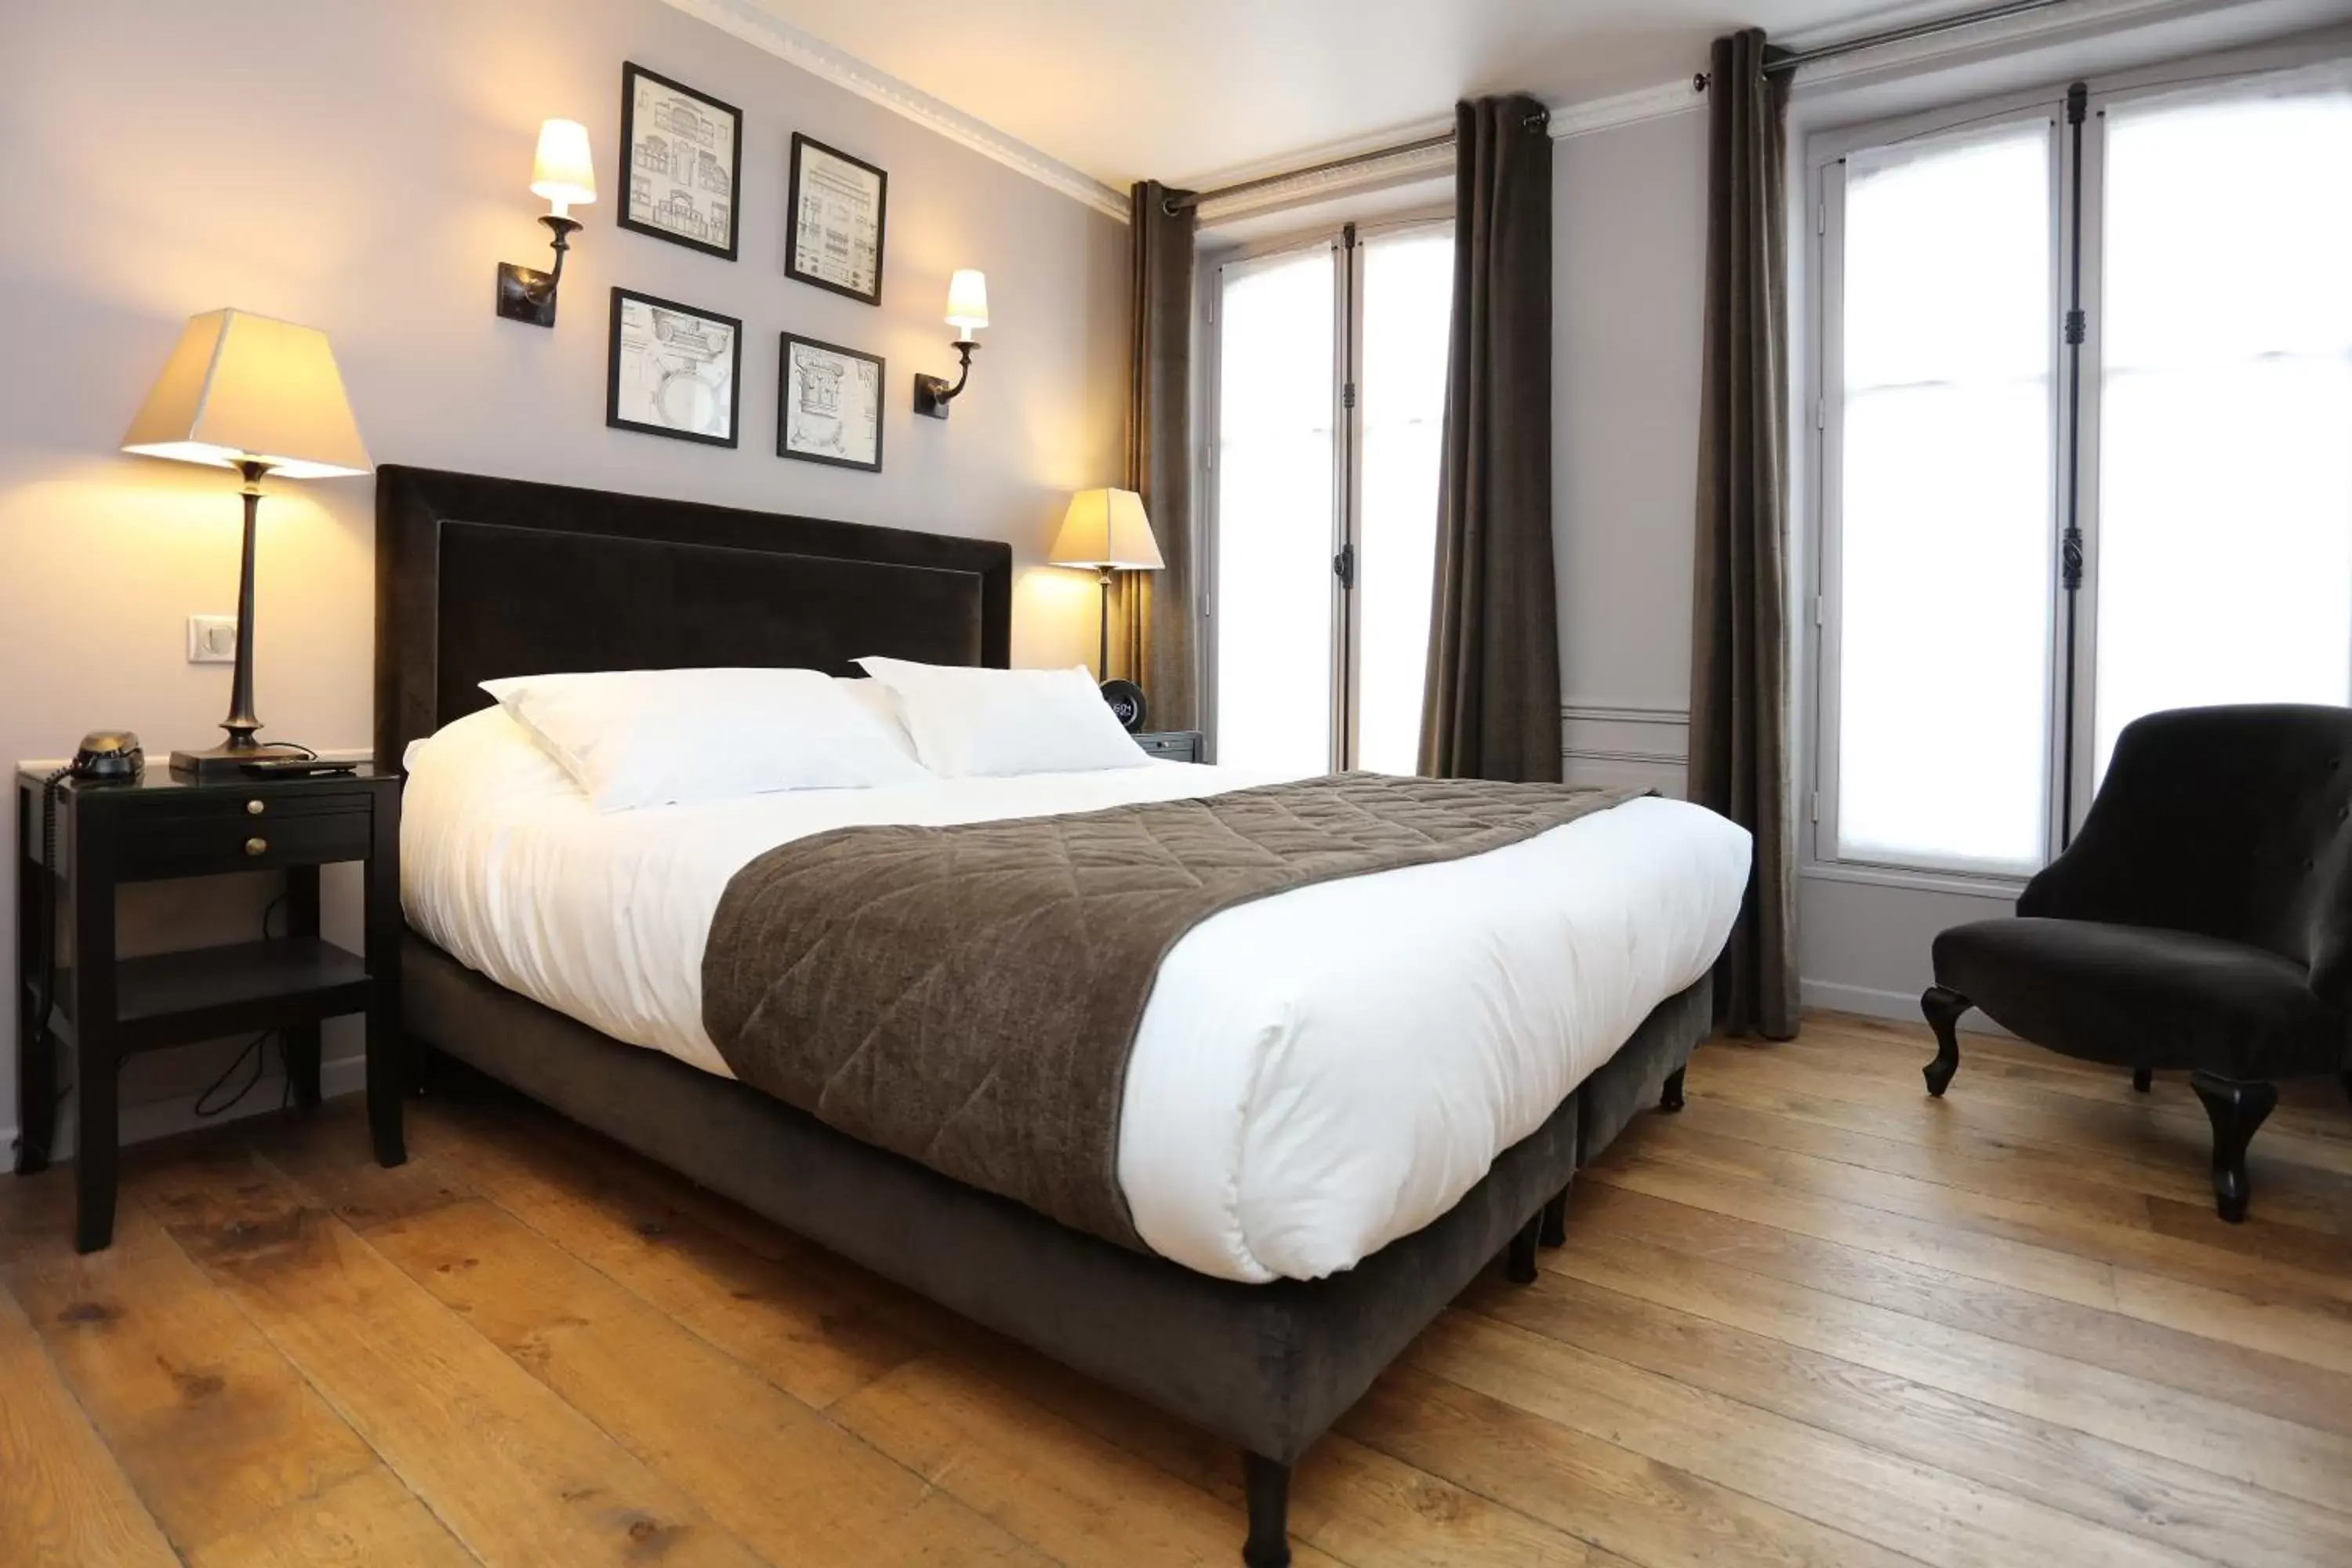 Deluxe Double or Twin Room with Balcony in Hotel Saint-Louis Pigalle